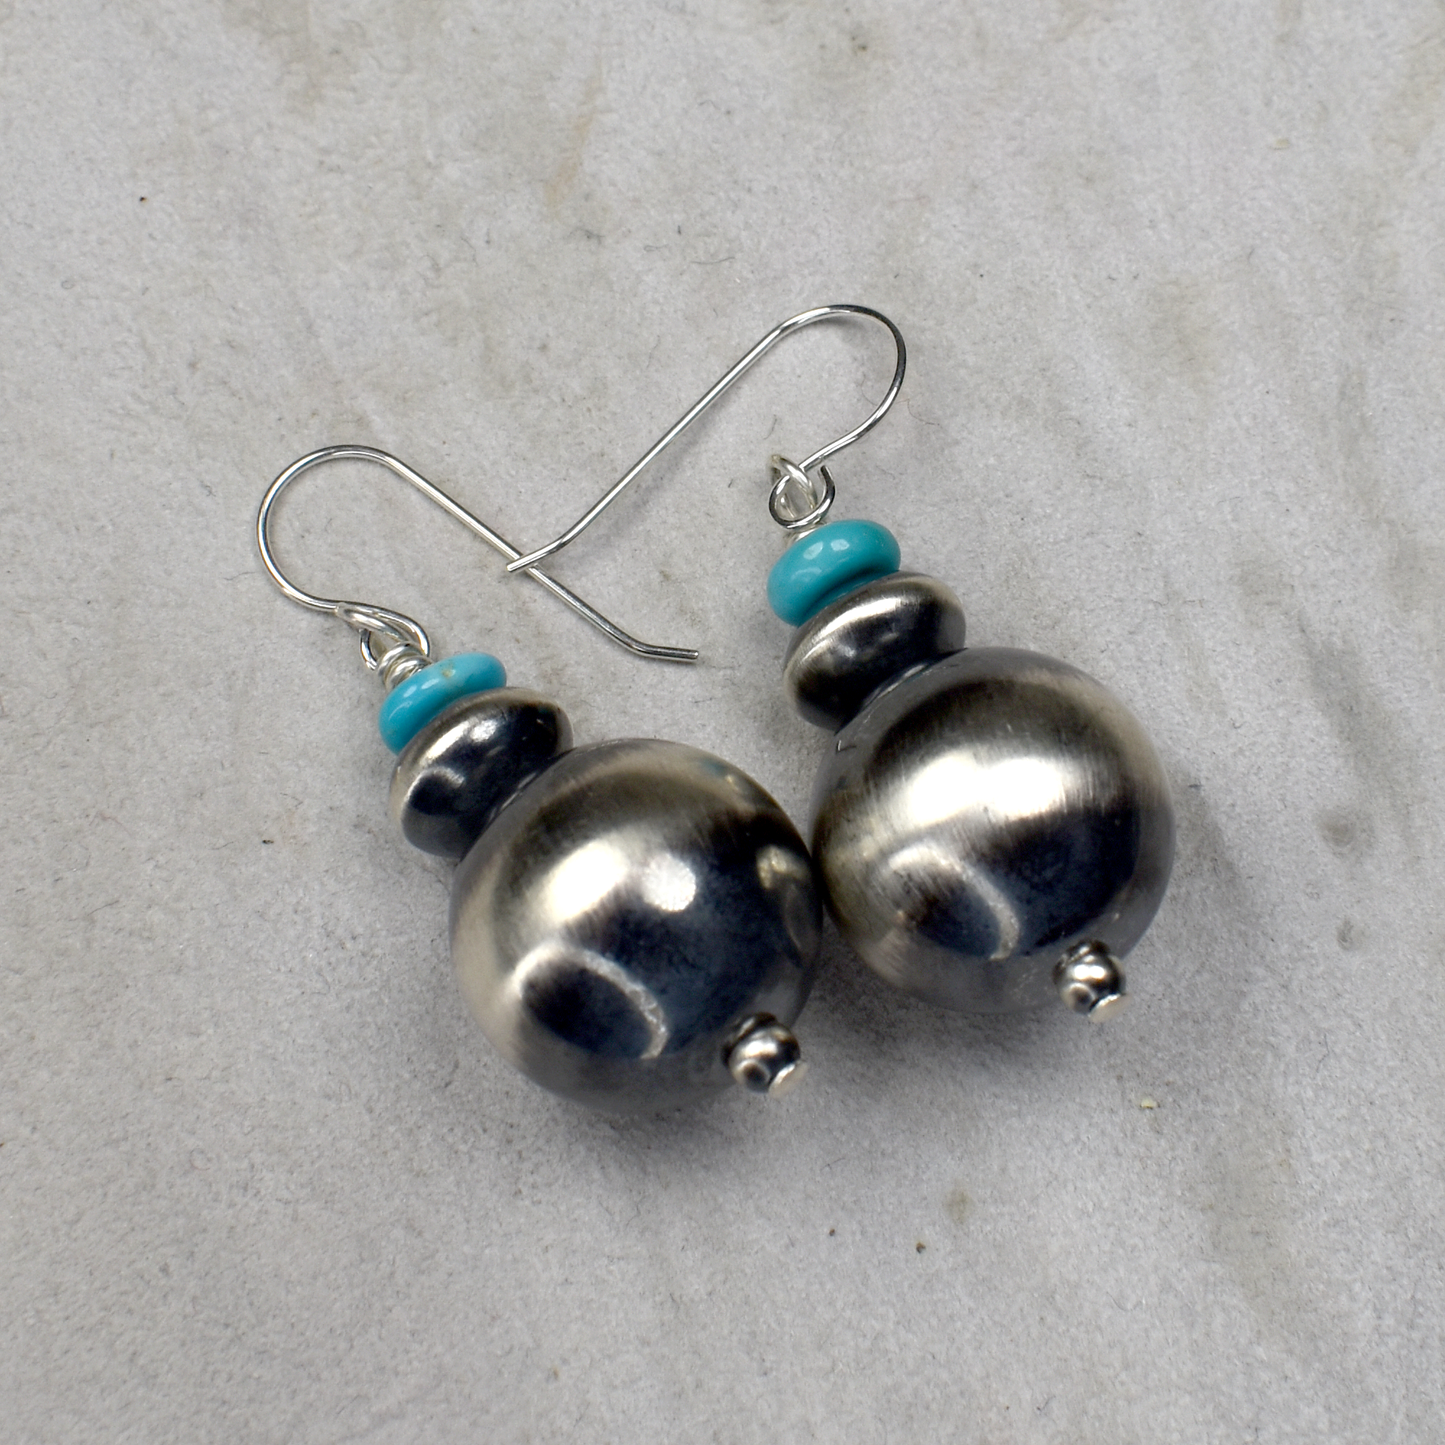 Zia Mountain Navajo Pearl and Pillow Bead Earrings with Sleeping Beauty Turquoise